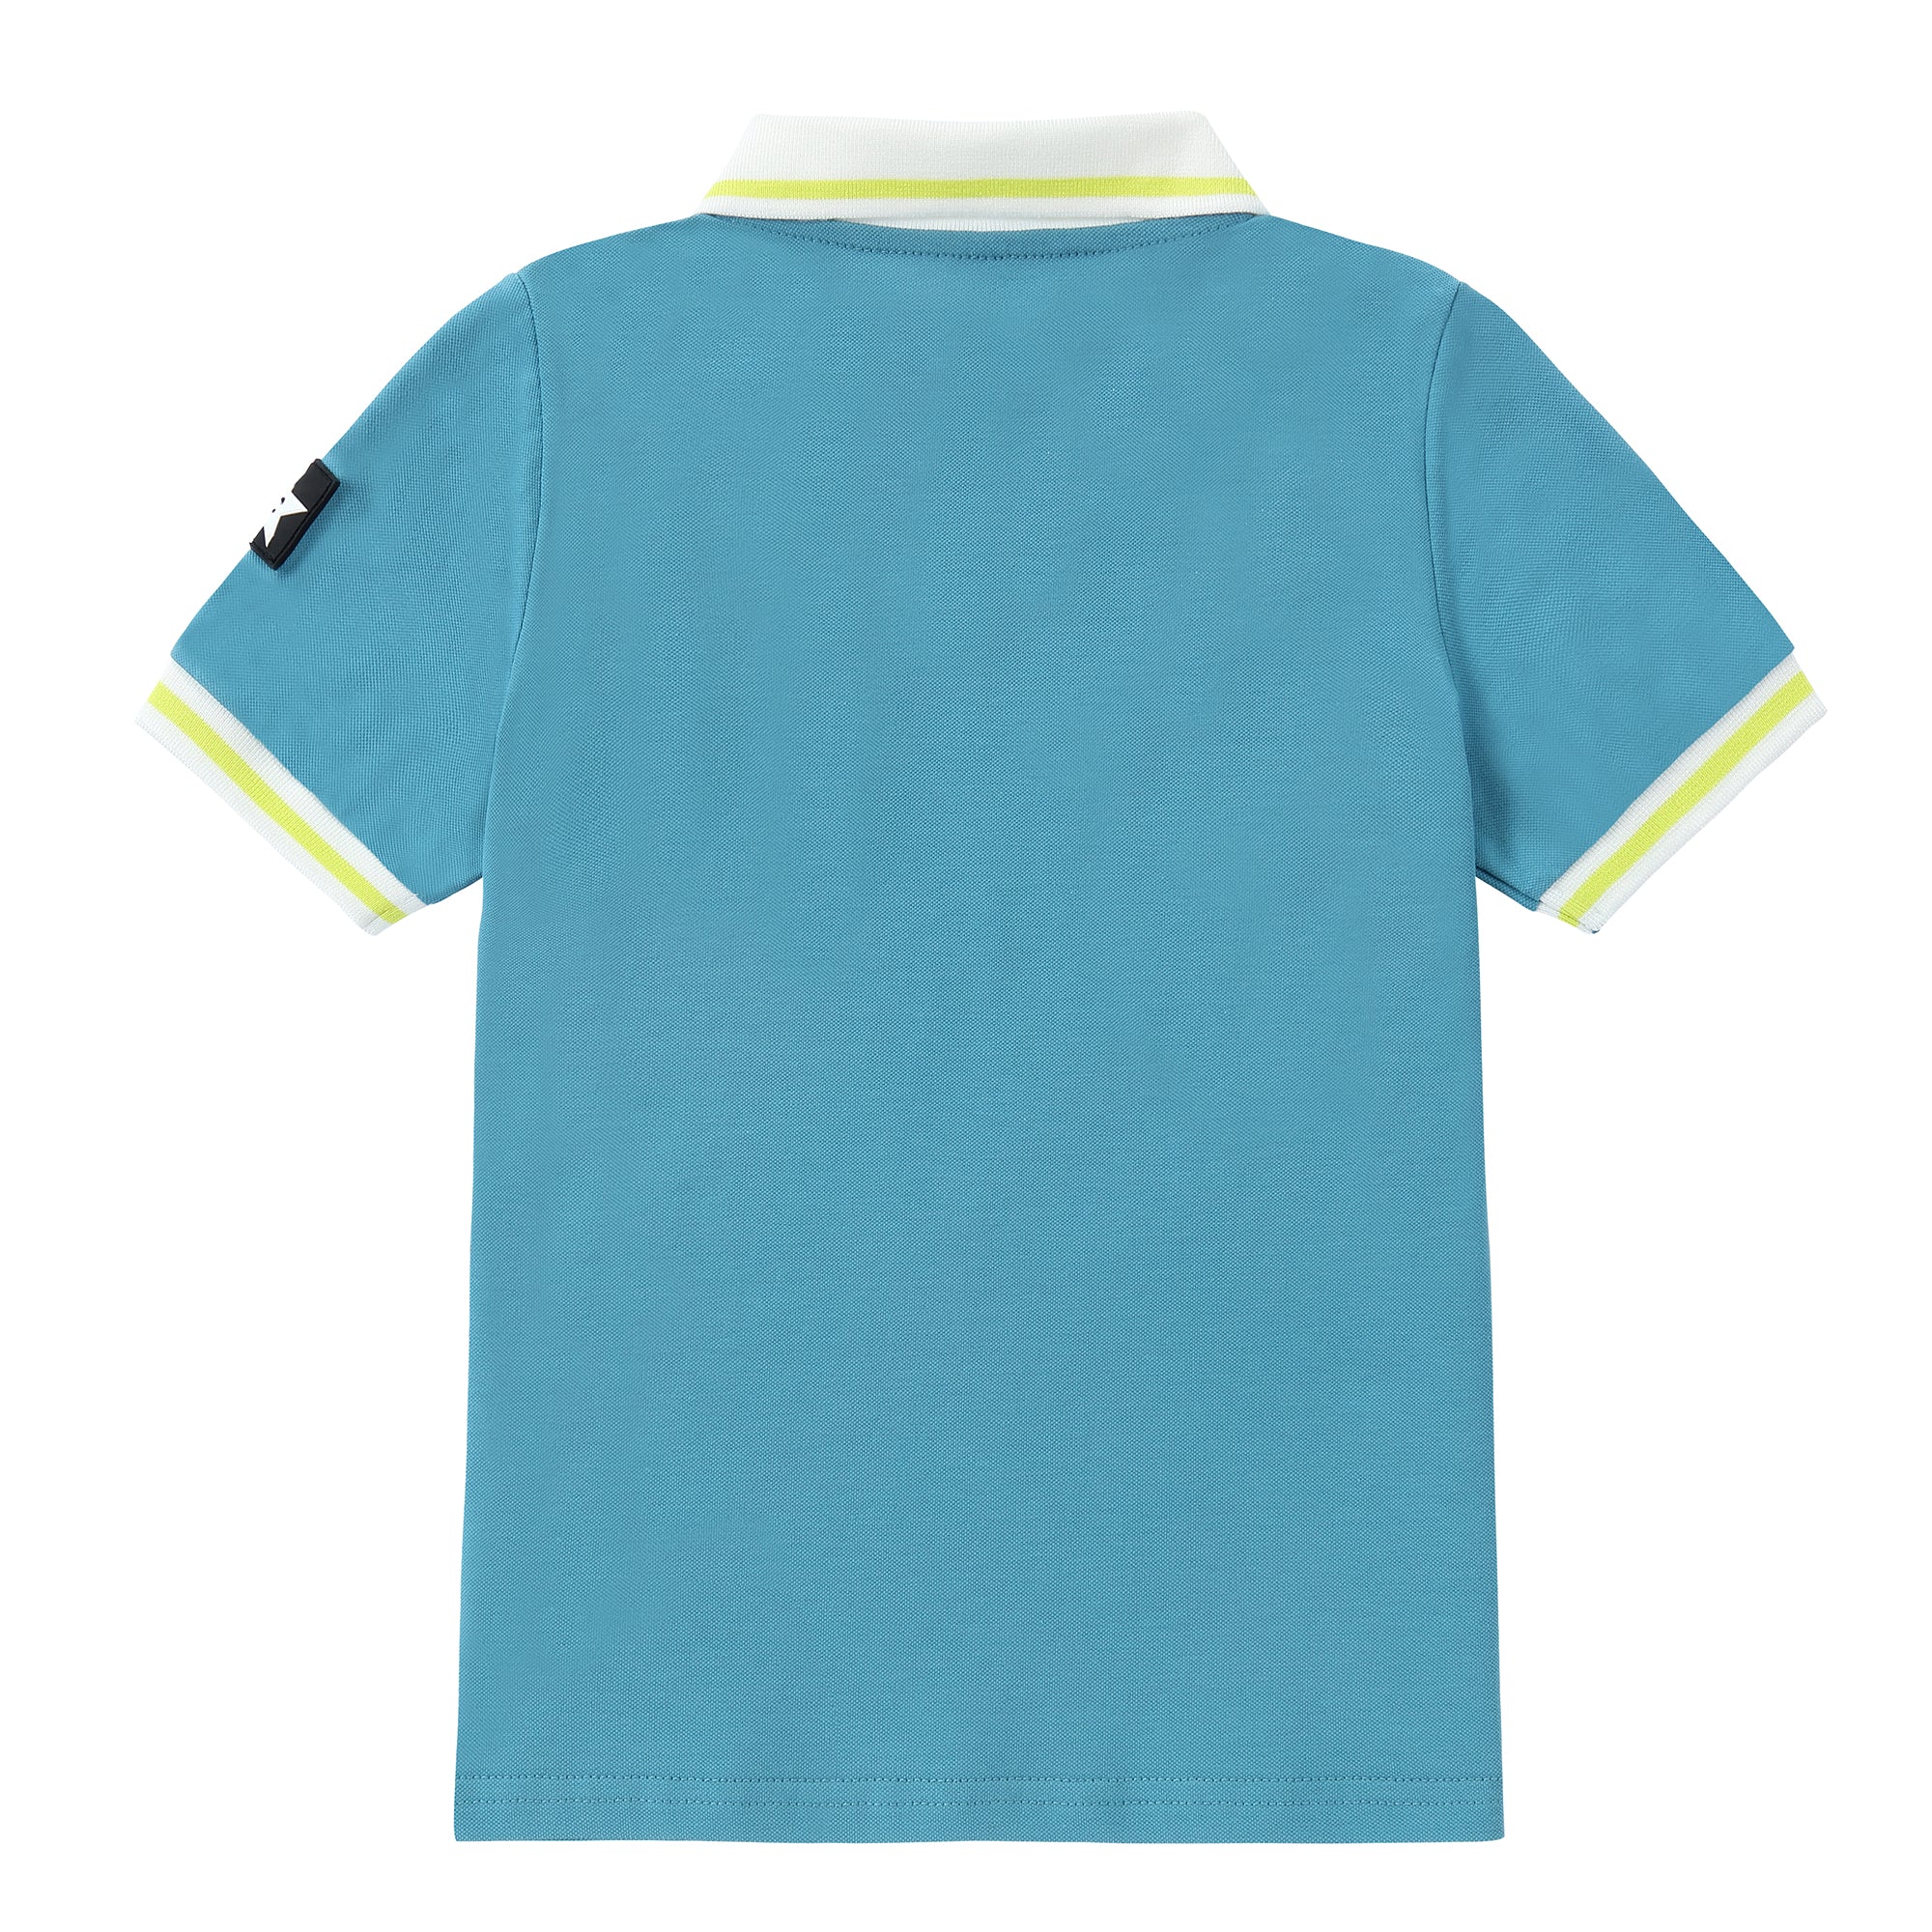 Light Blue V-Neck Short Sleeve Polo With Neon and White Accents